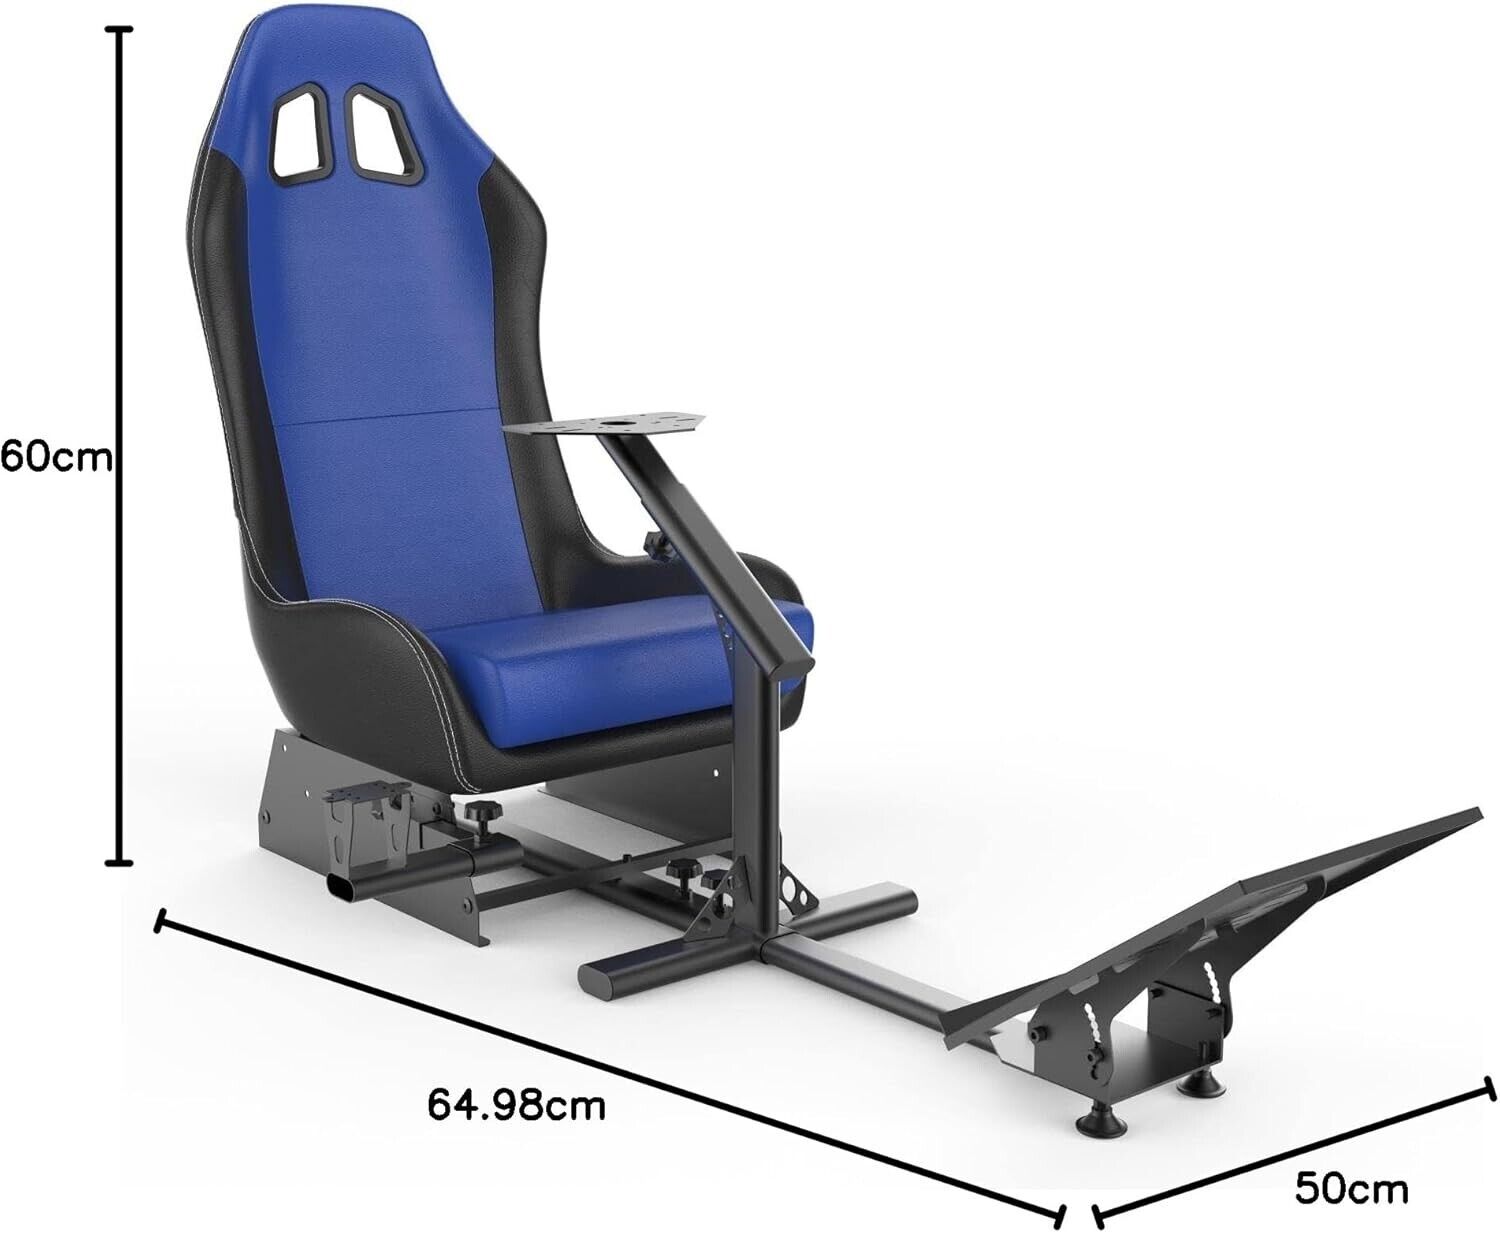 CR Driving Game Sim Racing Frame Rig & Seat All Logitech Thrustmaster Fanatec Xbox One PS4 PC Platforms Black & Blue